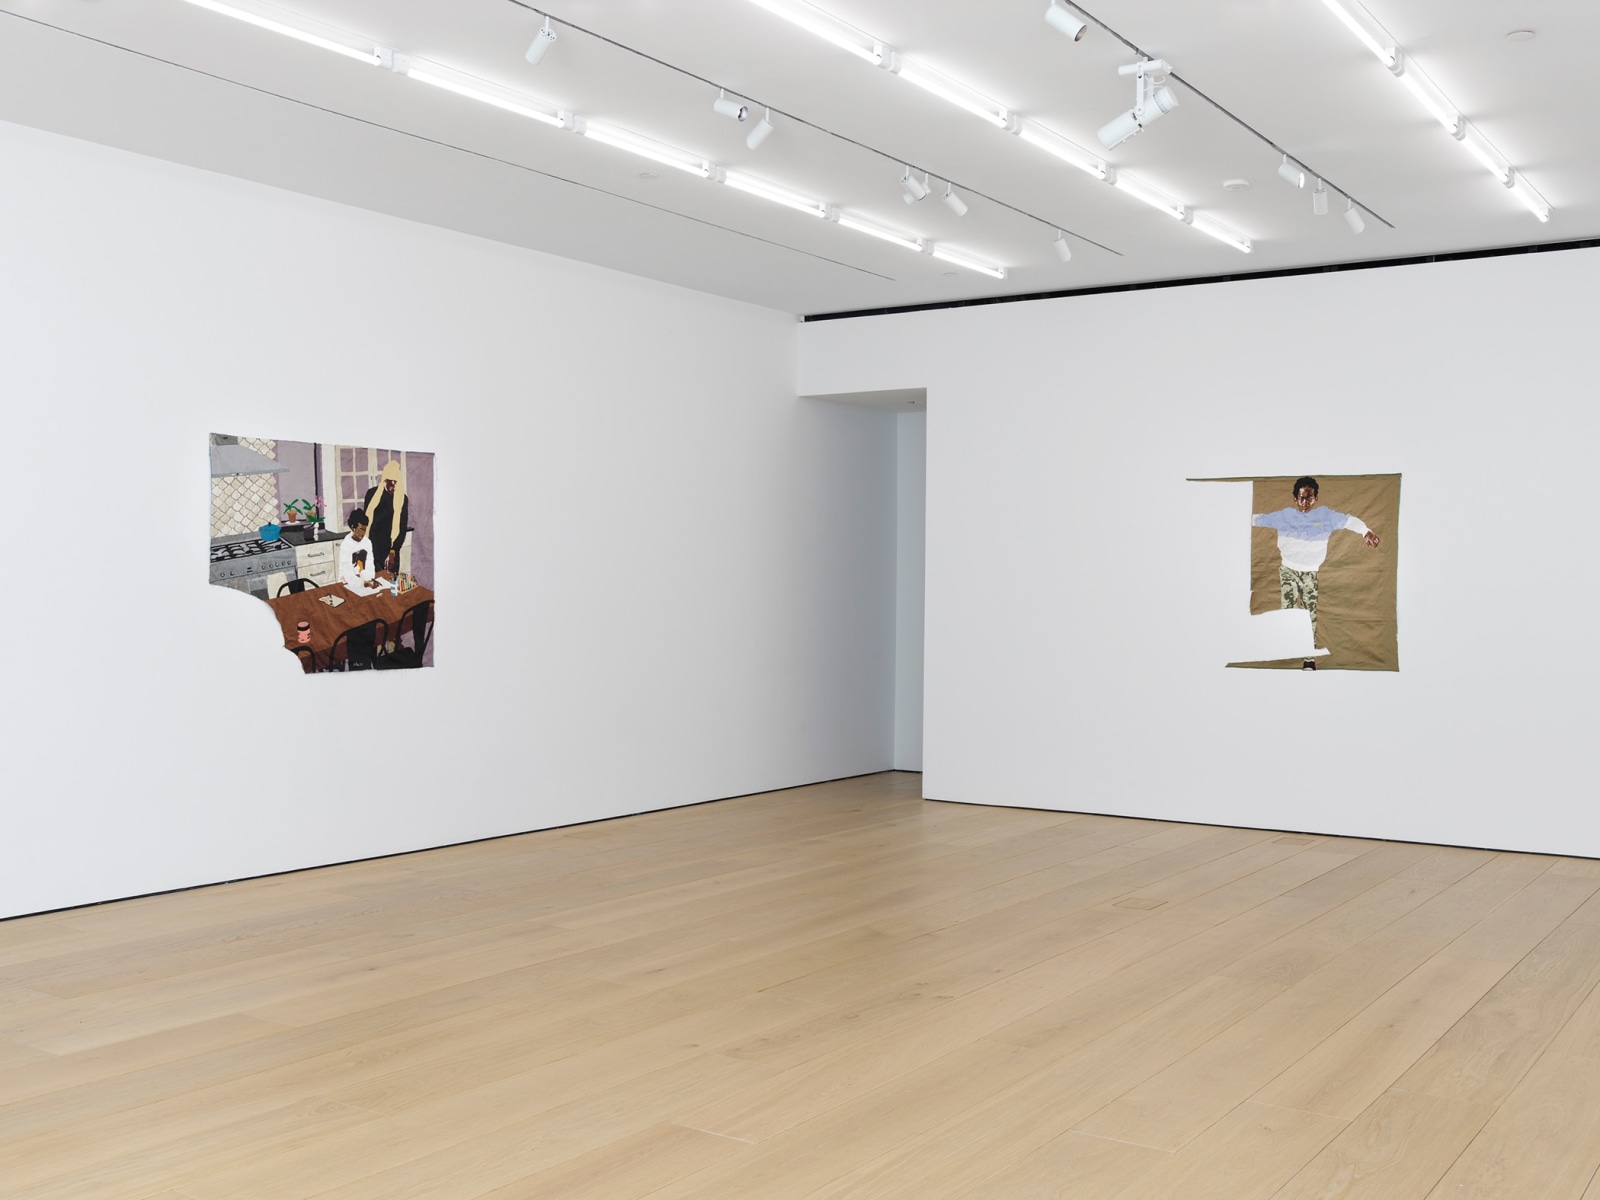 Third installation view of the exhibition Billie Zangewa: Wings of Change at Lehmann Maupin in New York